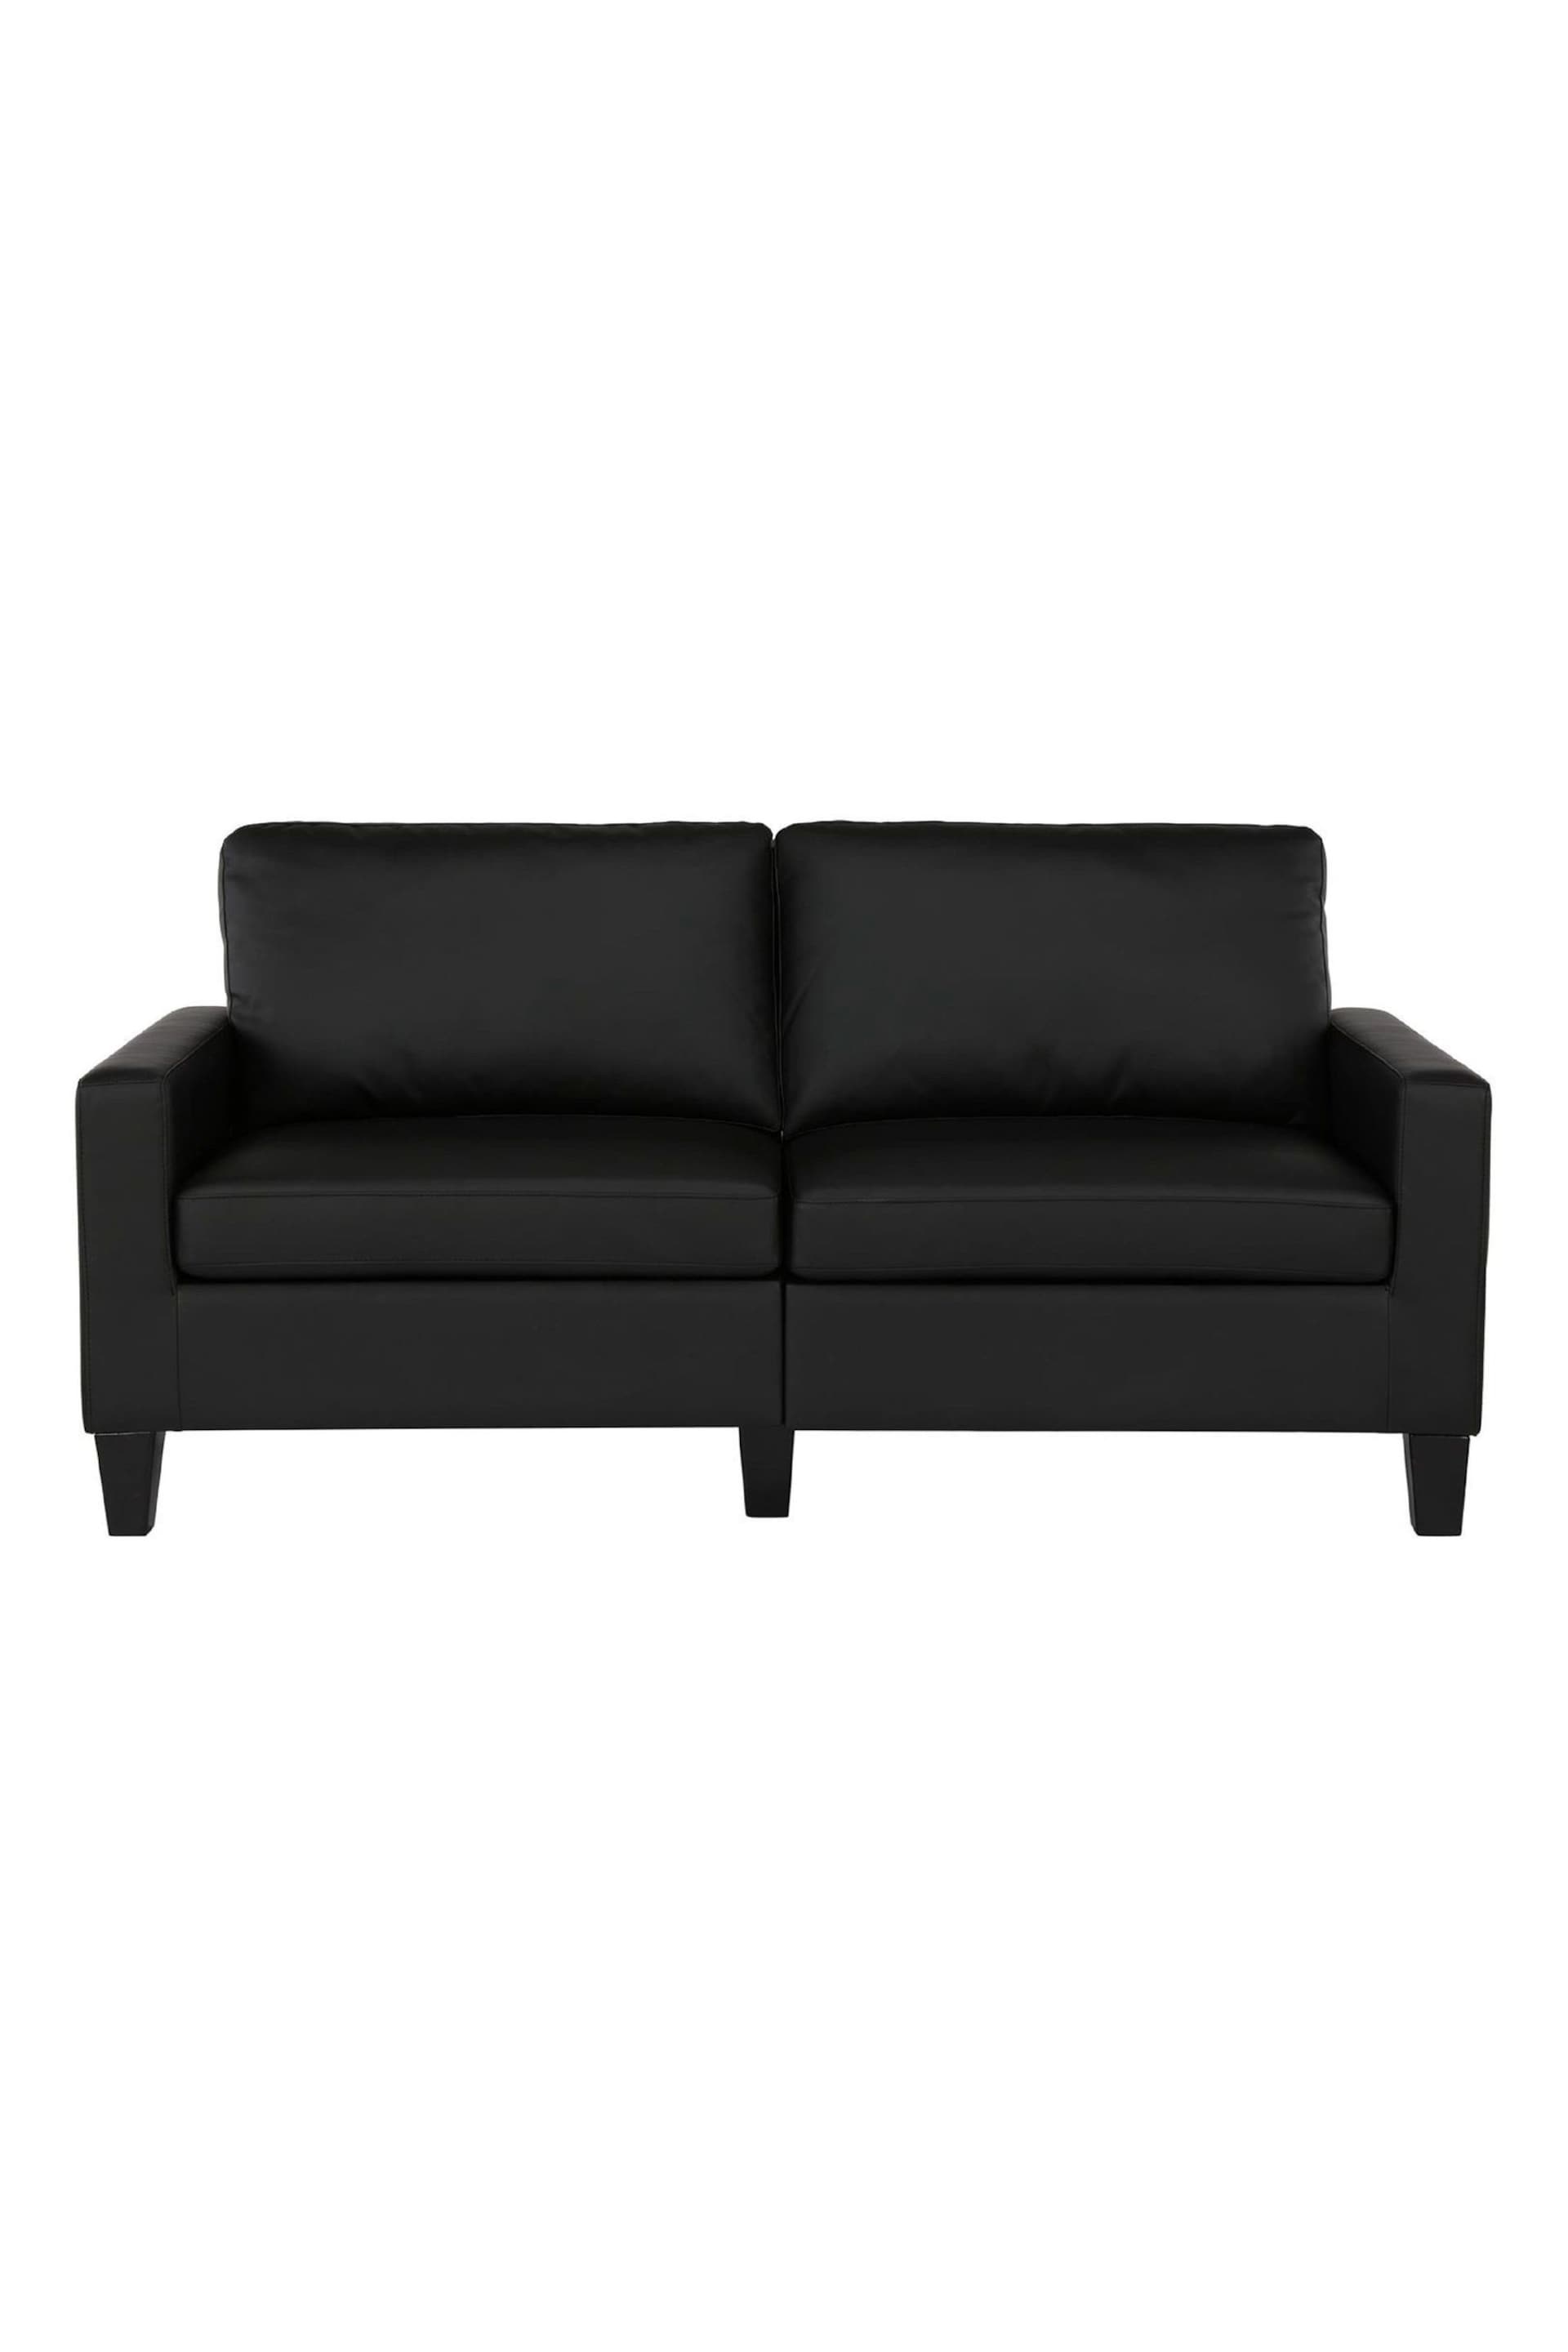 Dorel Home Black Europe Rylie Faux Leather Sofa - Image 4 of 4